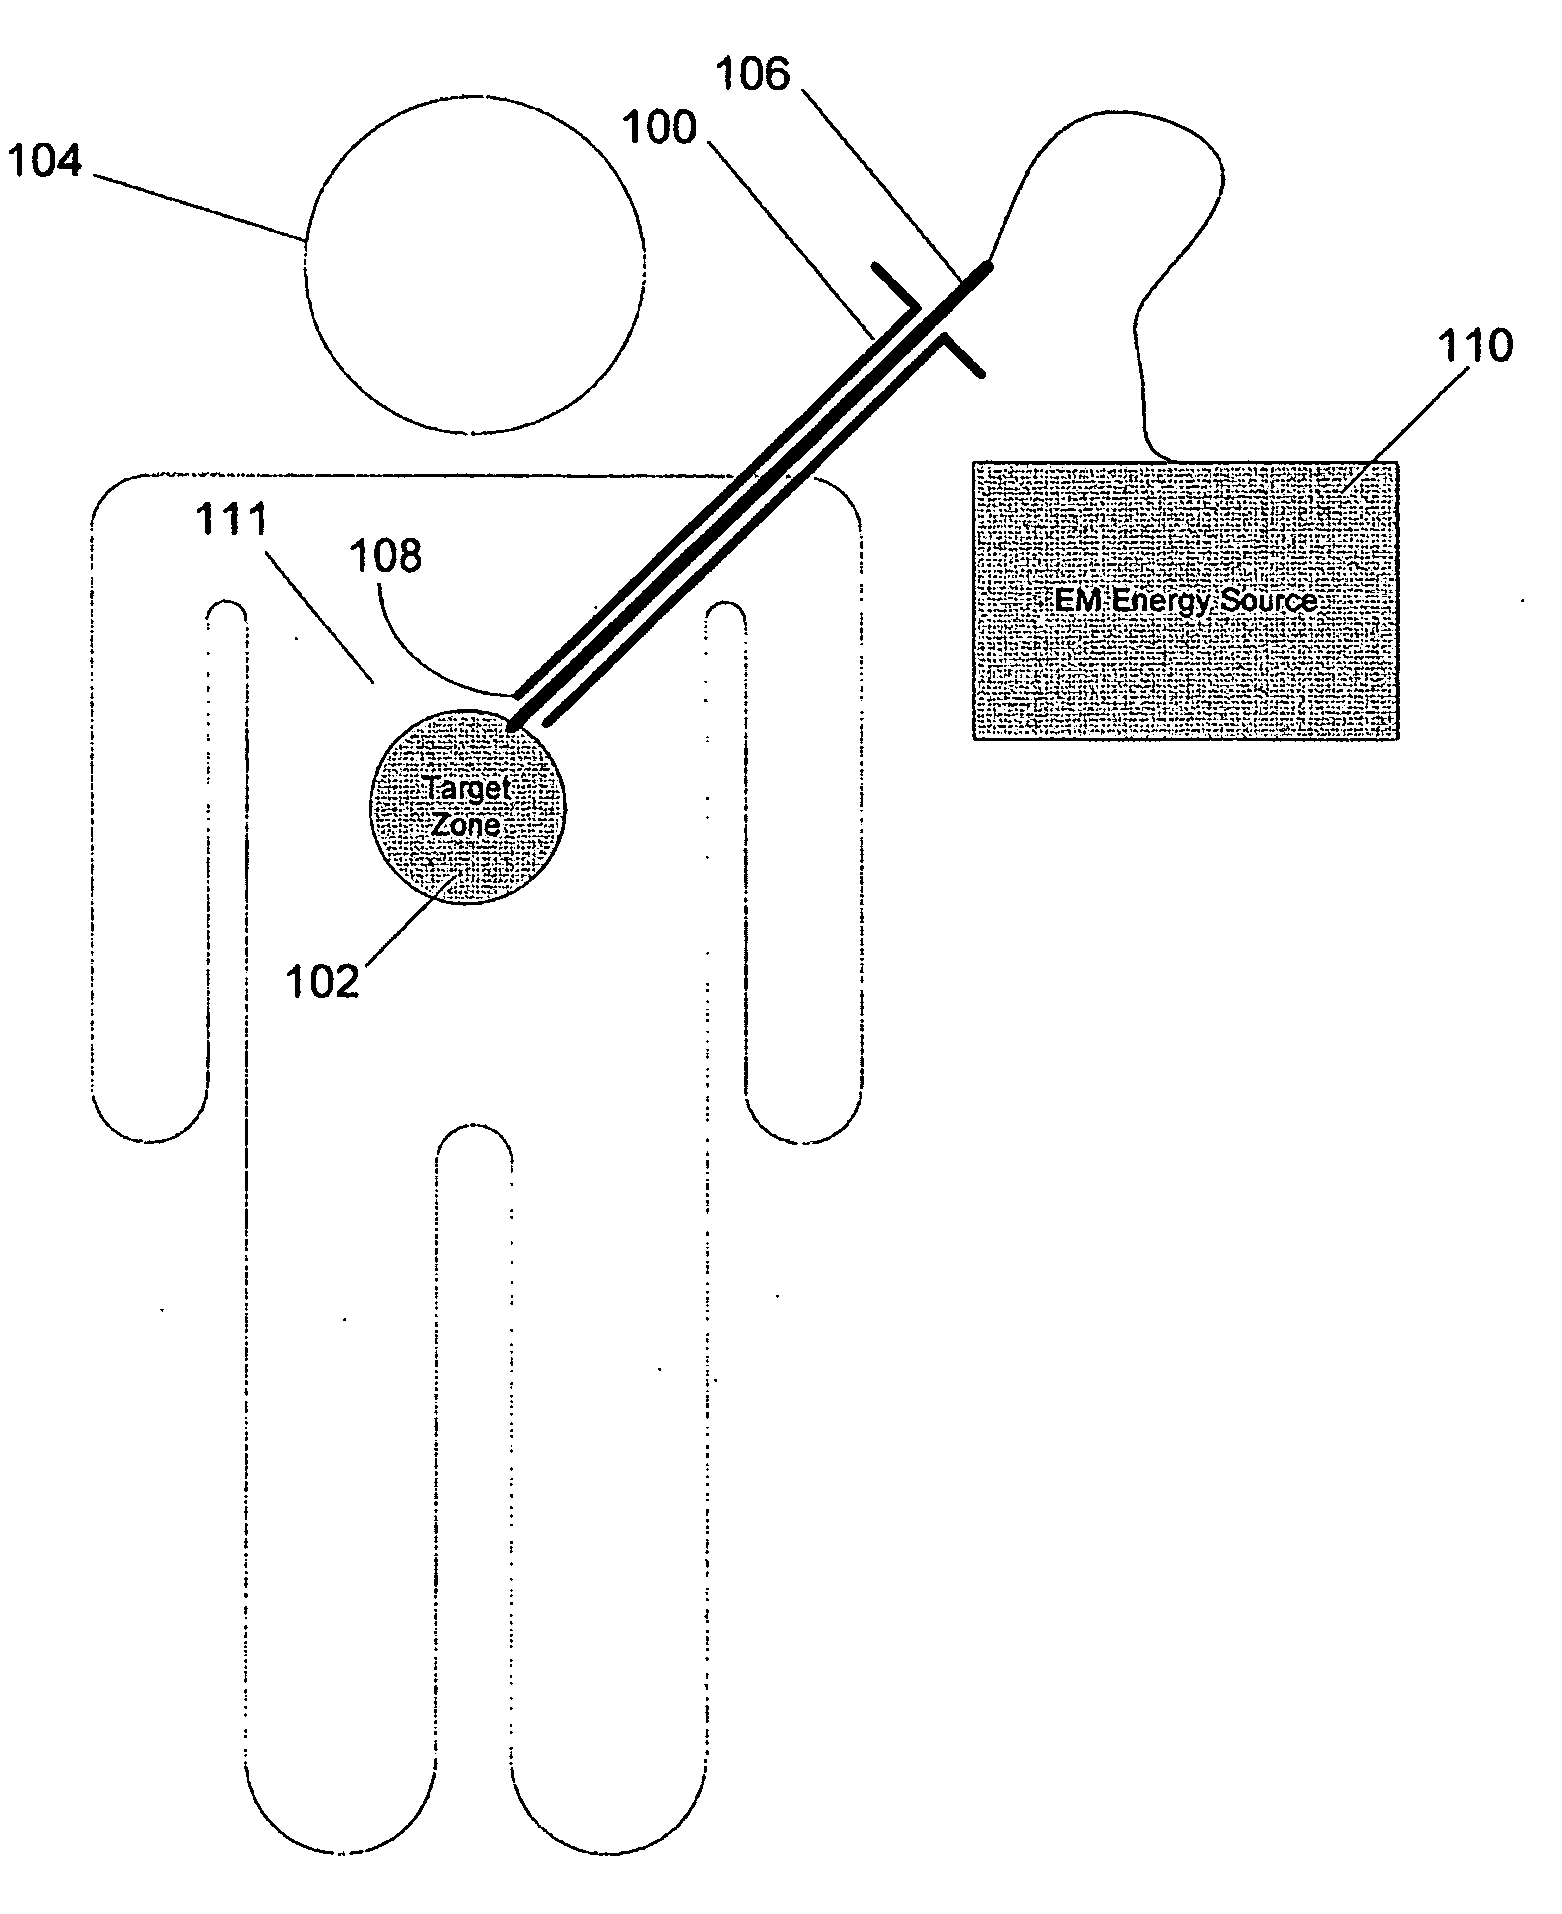 Heating via microwave and millimeter-wave transmission using a hypodermic needle